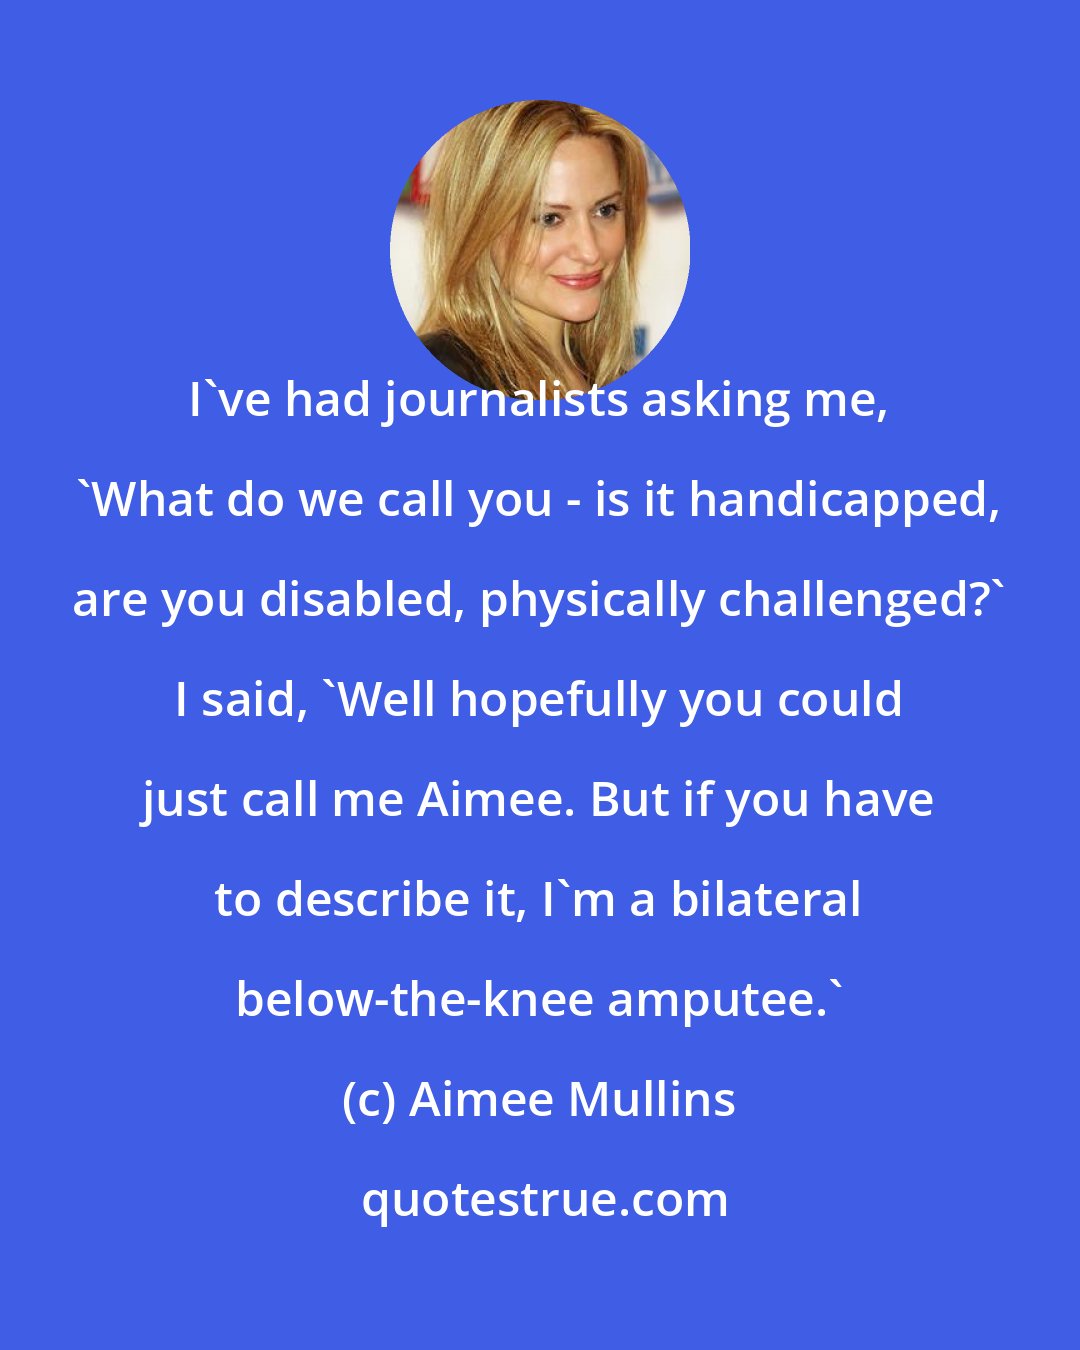 Aimee Mullins: I've had journalists asking me, 'What do we call you - is it handicapped, are you disabled, physically challenged?' I said, 'Well hopefully you could just call me Aimee. But if you have to describe it, I'm a bilateral below-the-knee amputee.'